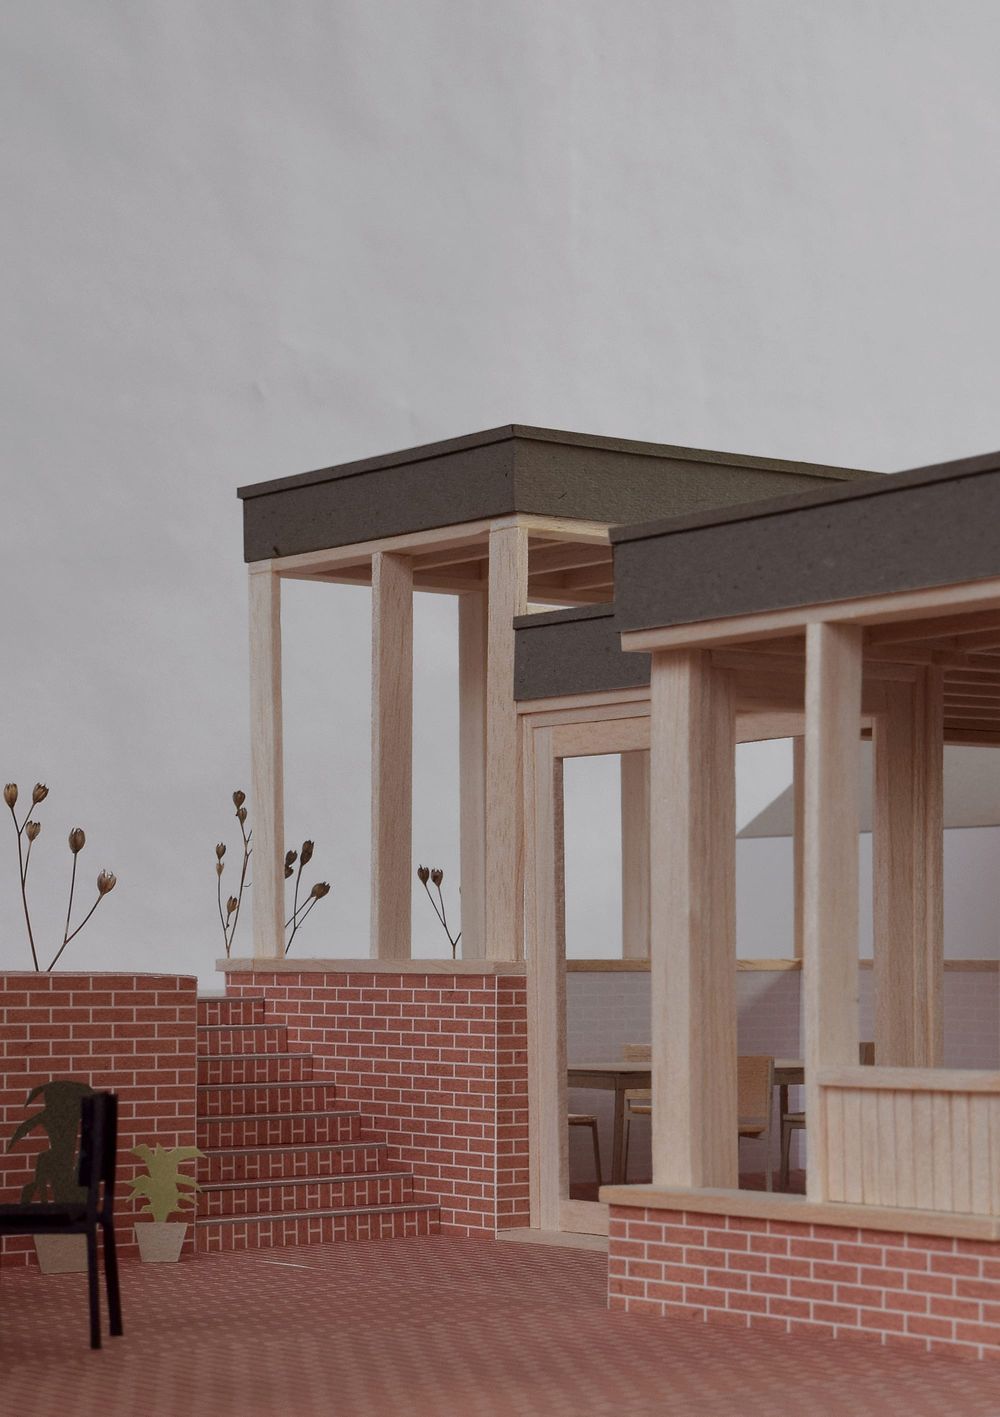 External model photograph for From Work's stepped brick and timber rear extension.